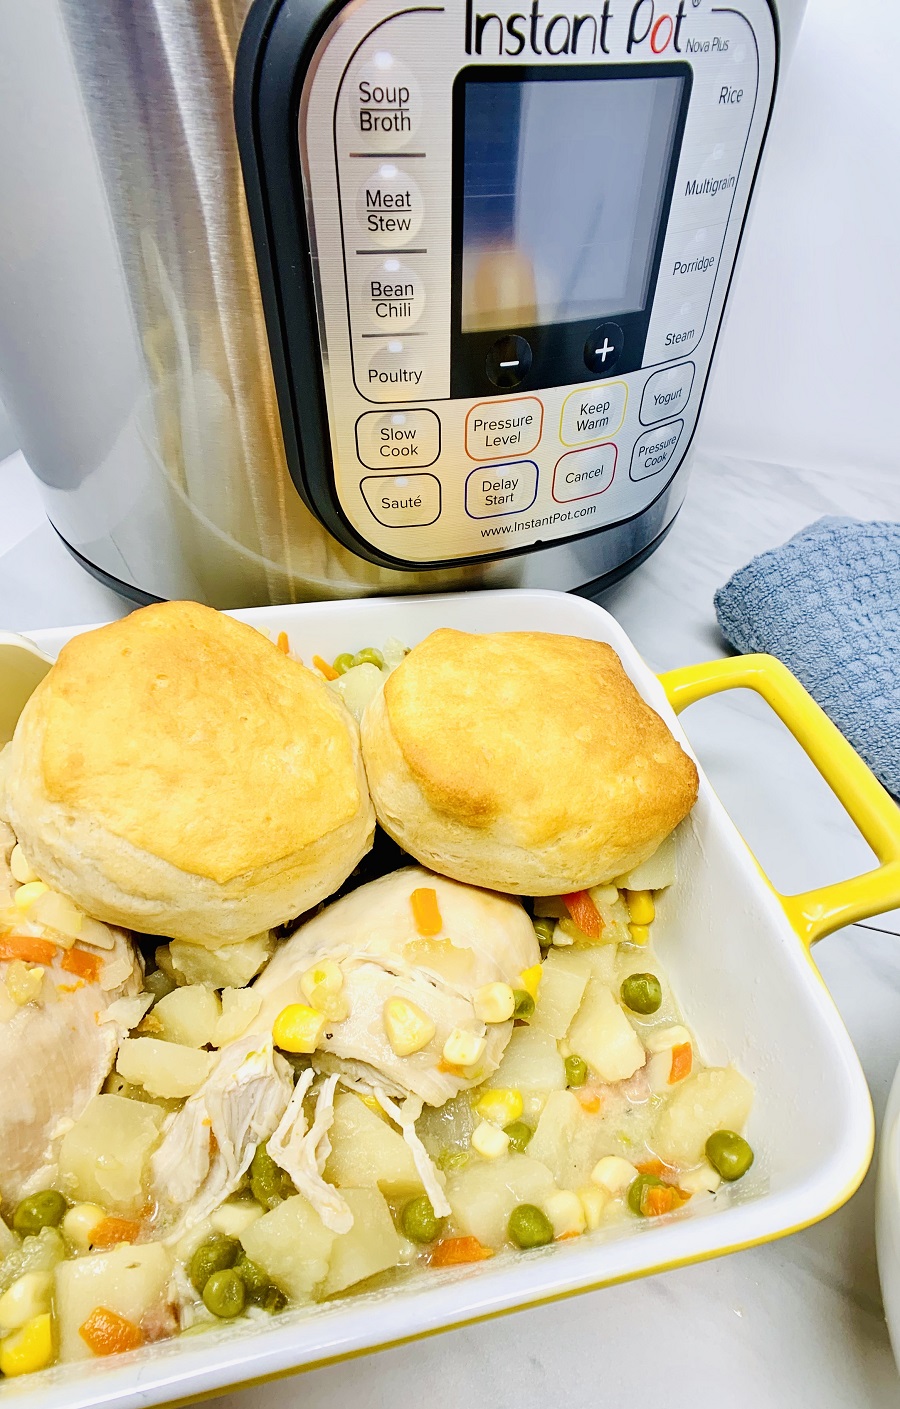 Pressure Cooker Chicken Pot Pie Recipes Dish of Chicken Pot Pie in Front of an Instant Pot